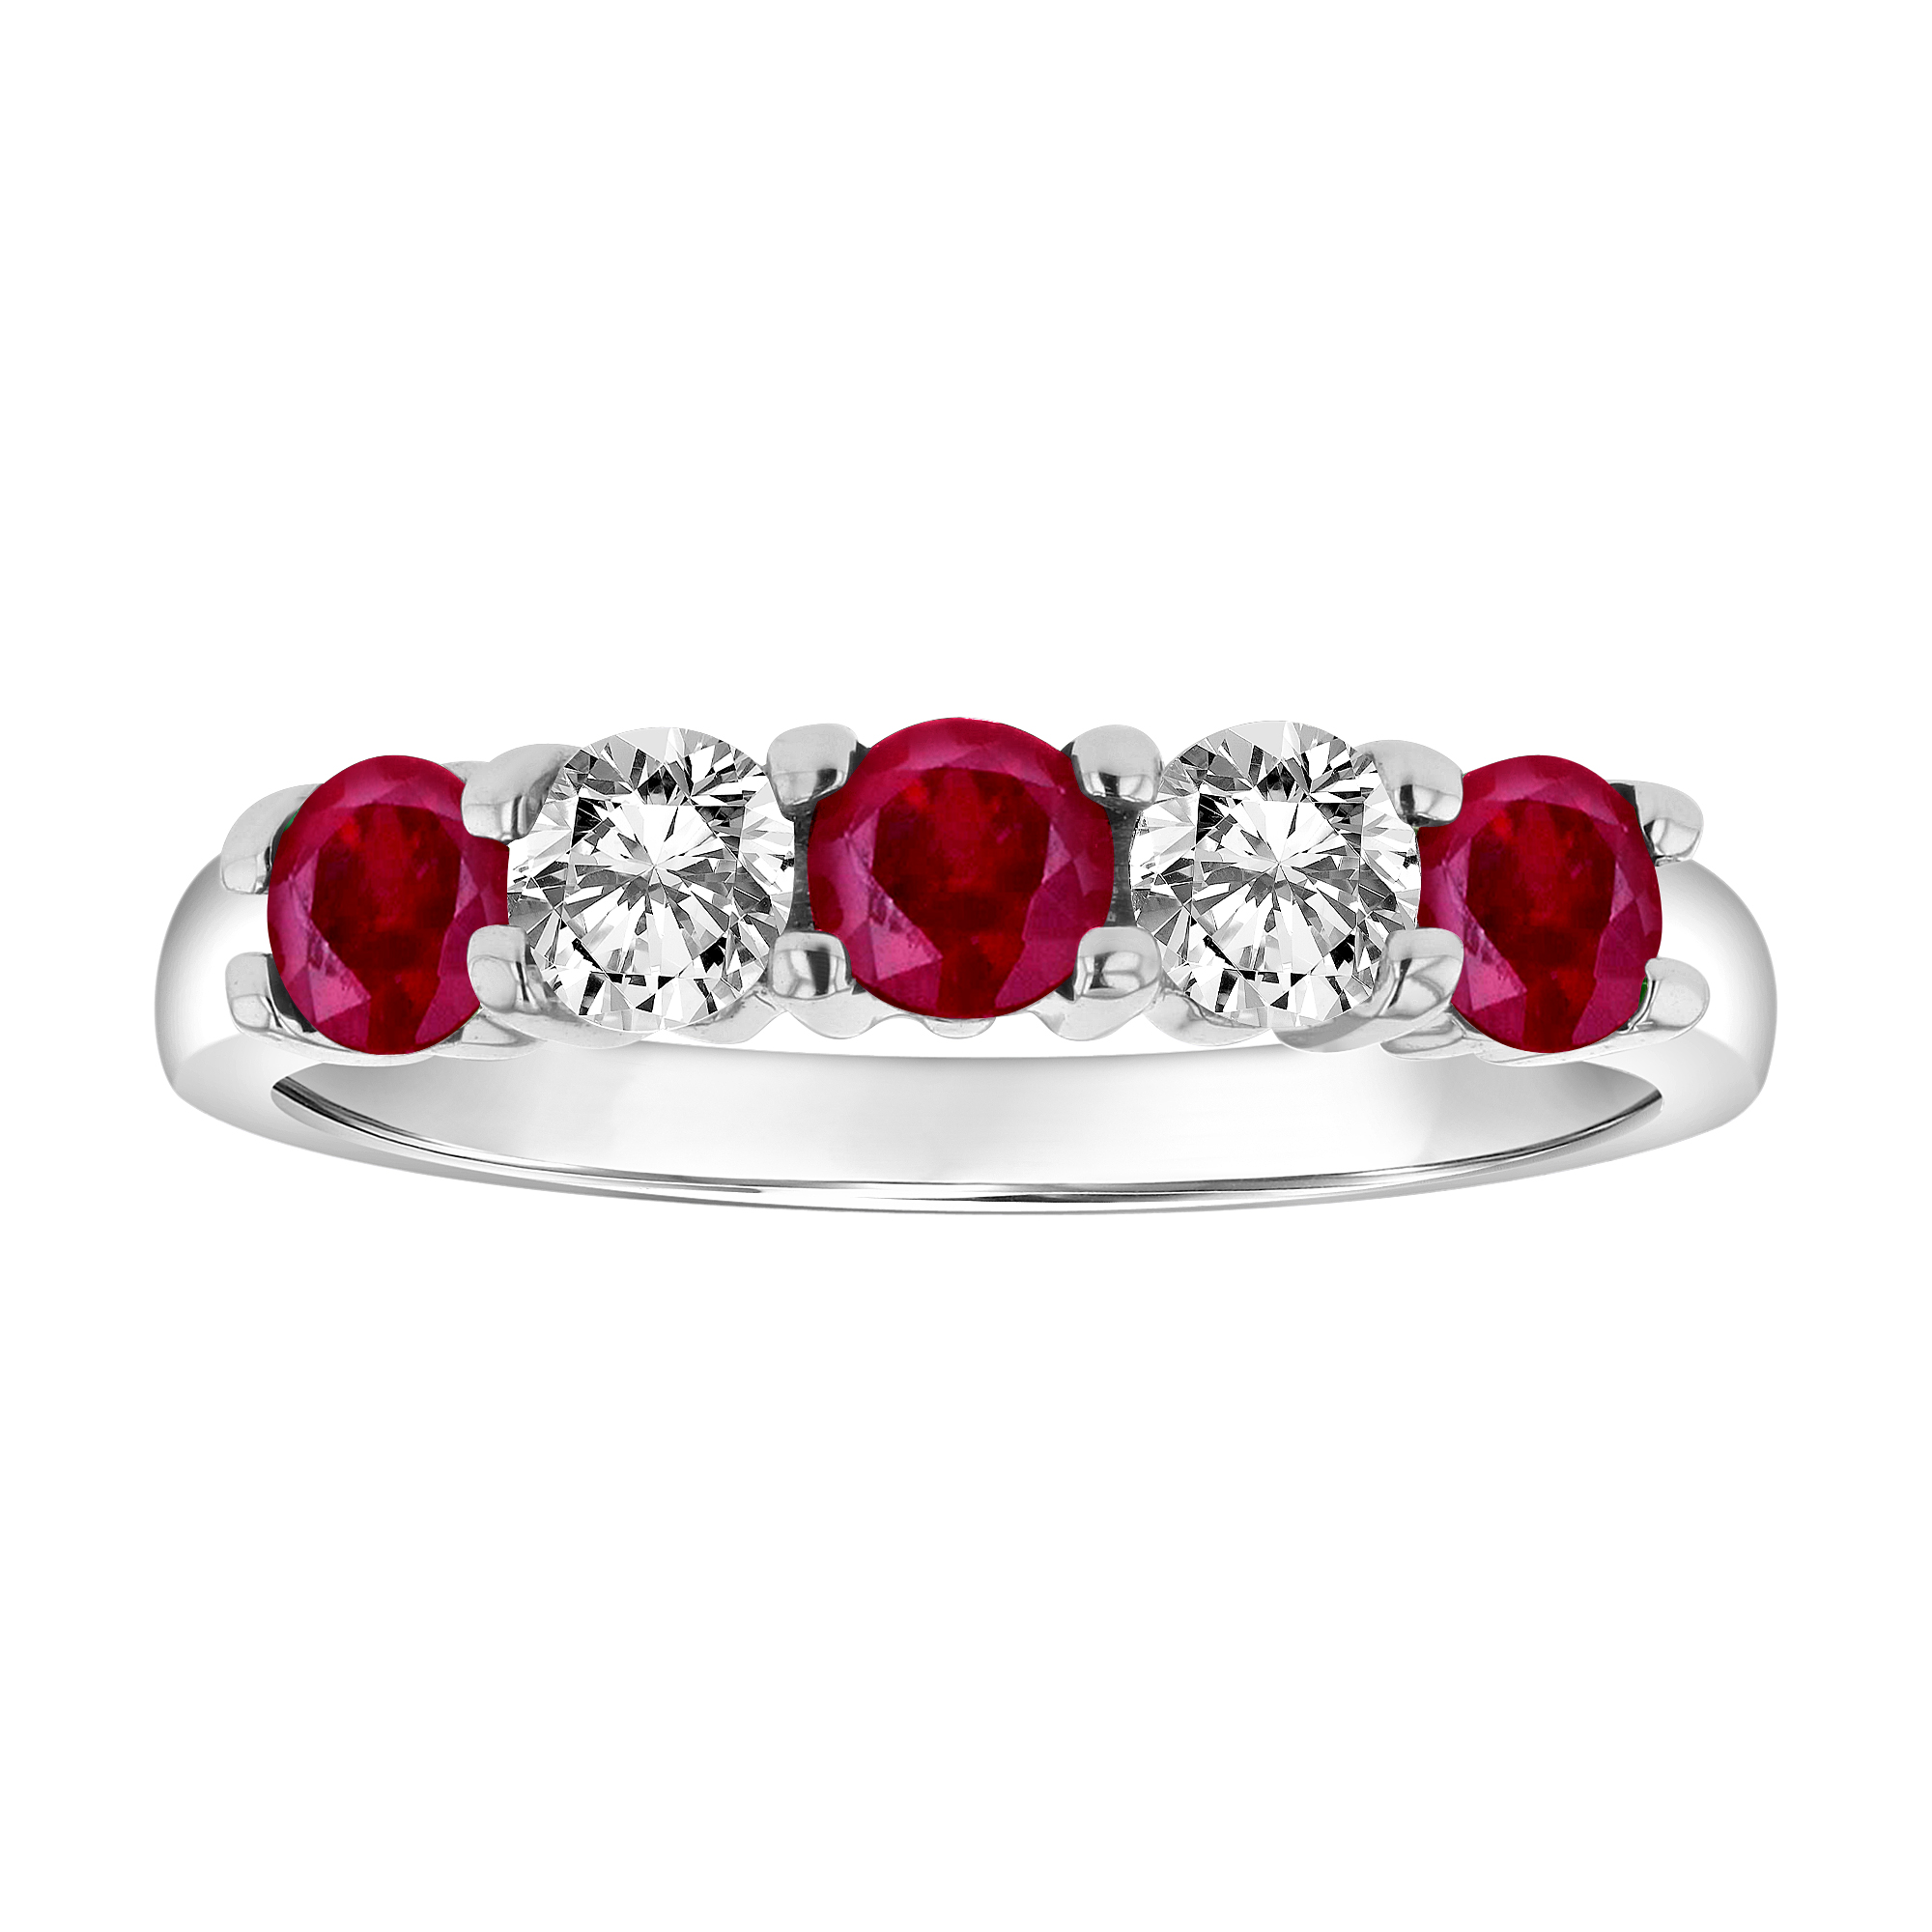 1.26cttw Natural Heated Ruby and Diamond Ring set in 14k Gold